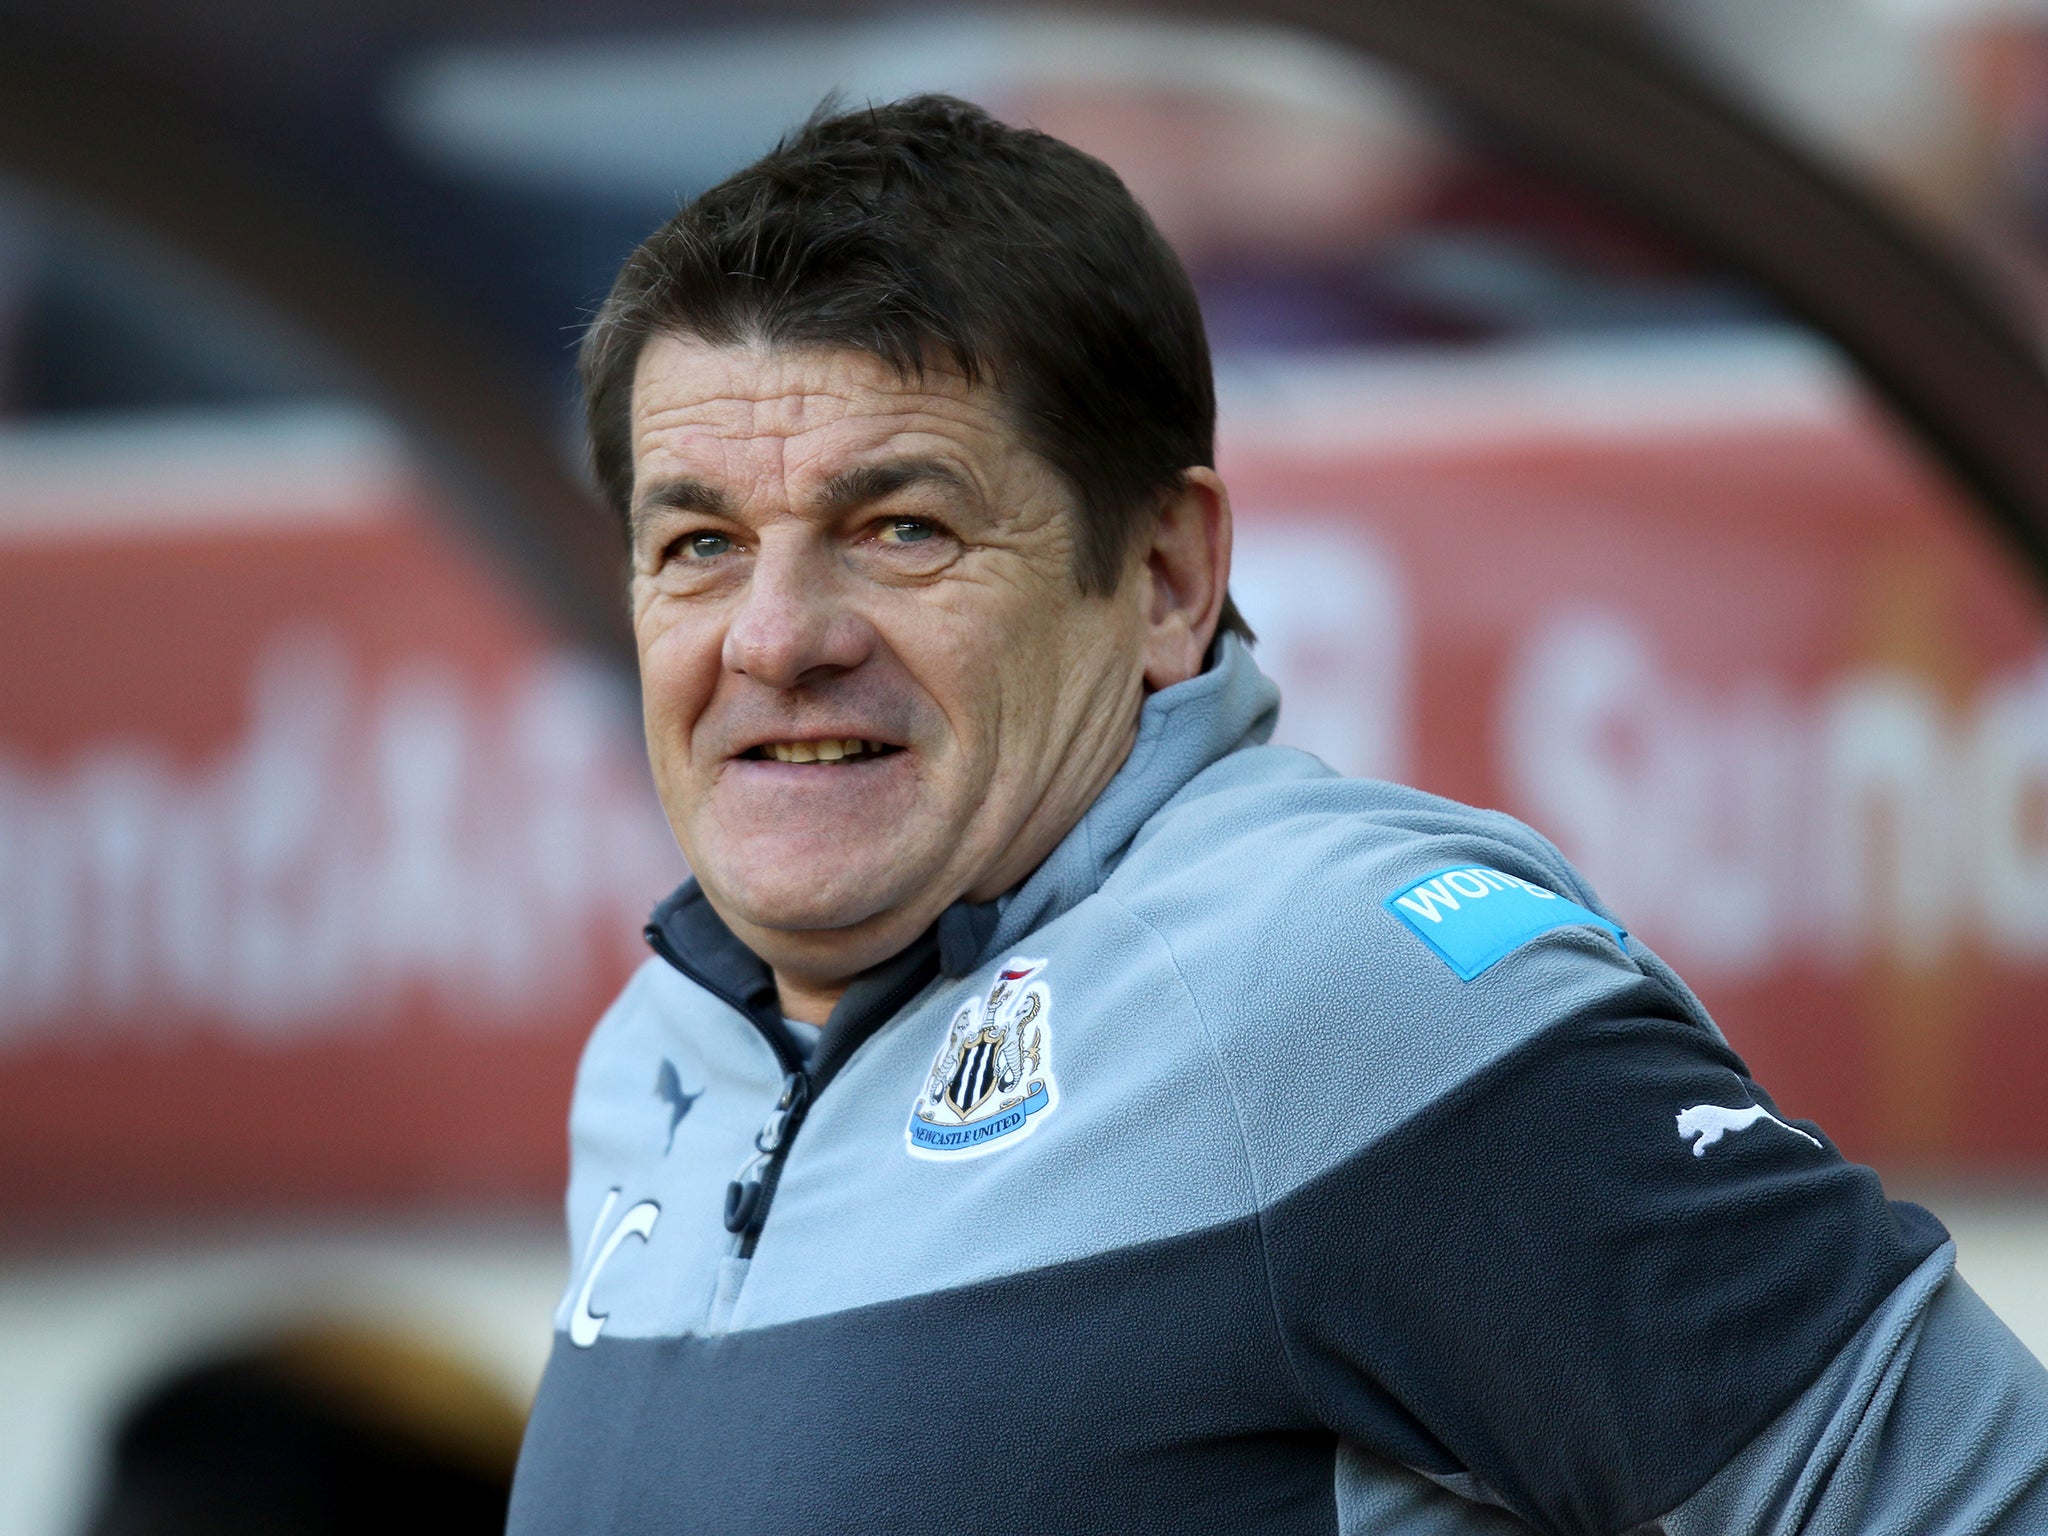 John Carver has had talks with Mike Williamson after claiming the defender got
himself sent off